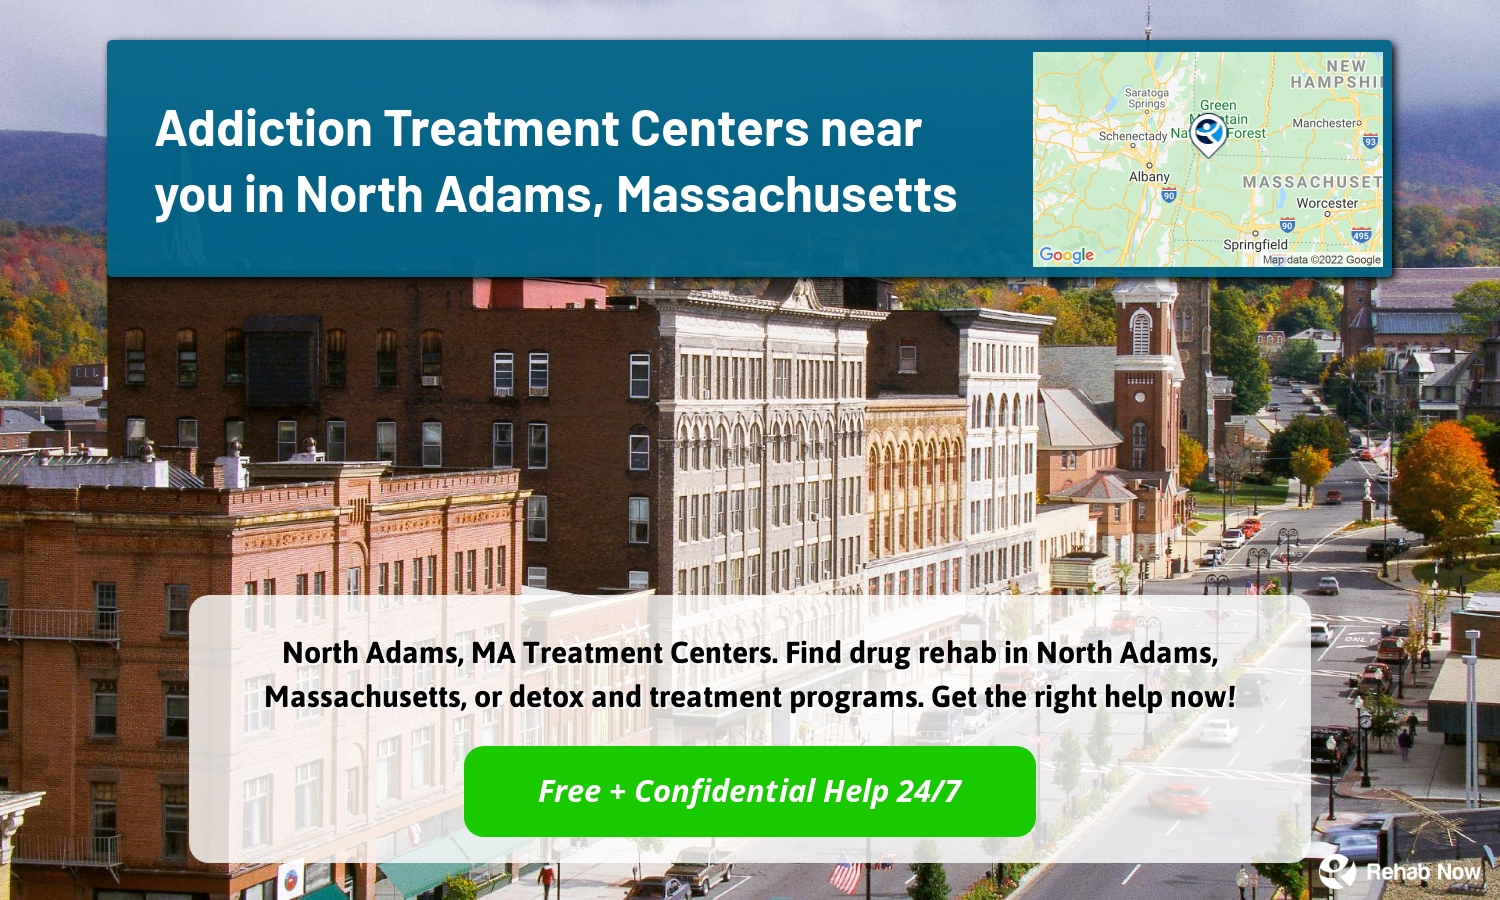 North Adams, MA Treatment Centers. Find drug rehab in North Adams, Massachusetts, or detox and treatment programs. Get the right help now!